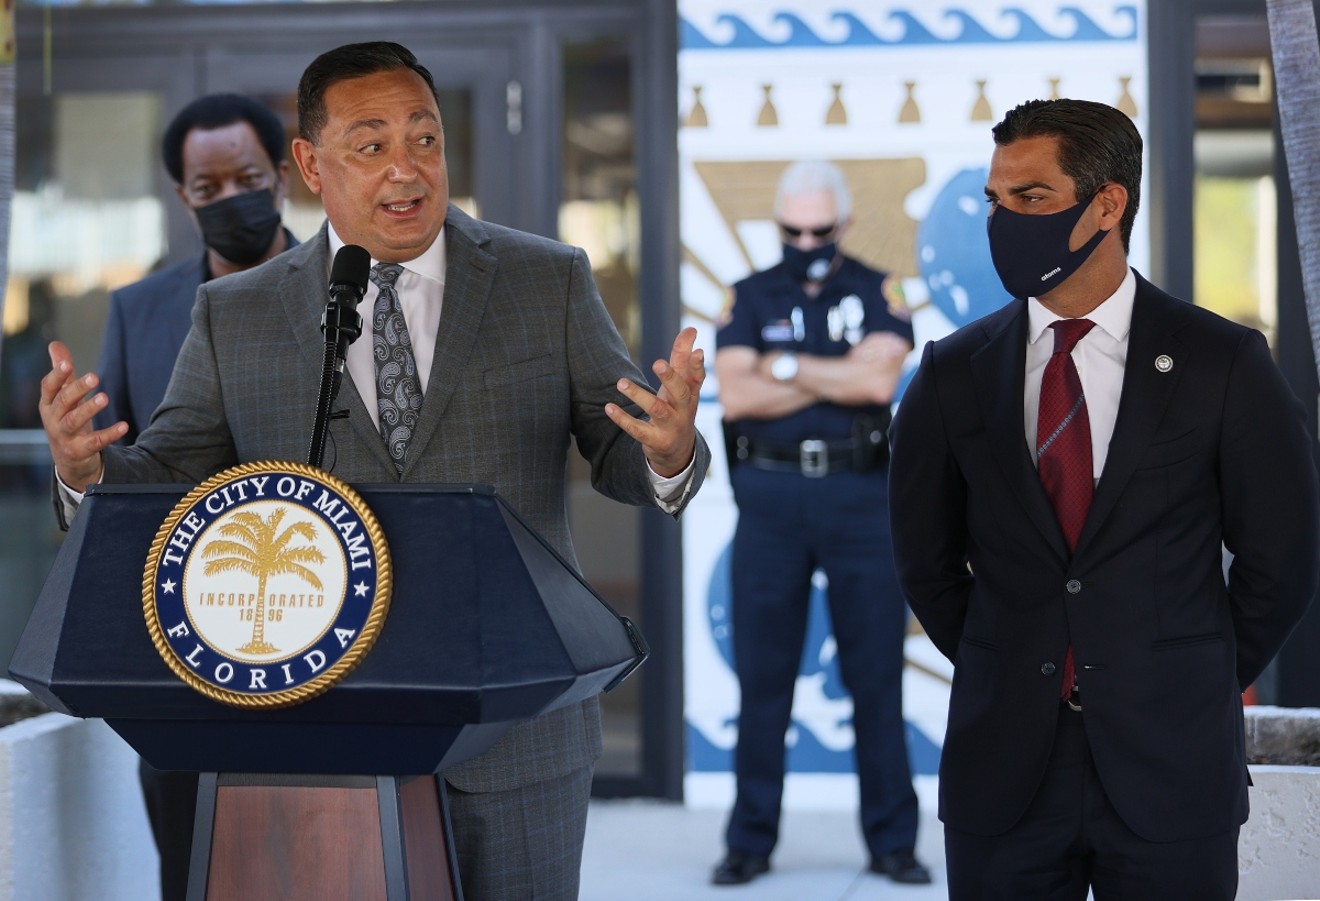 Miami's new police chief, Art Acevedo, promises reforms to the police department.